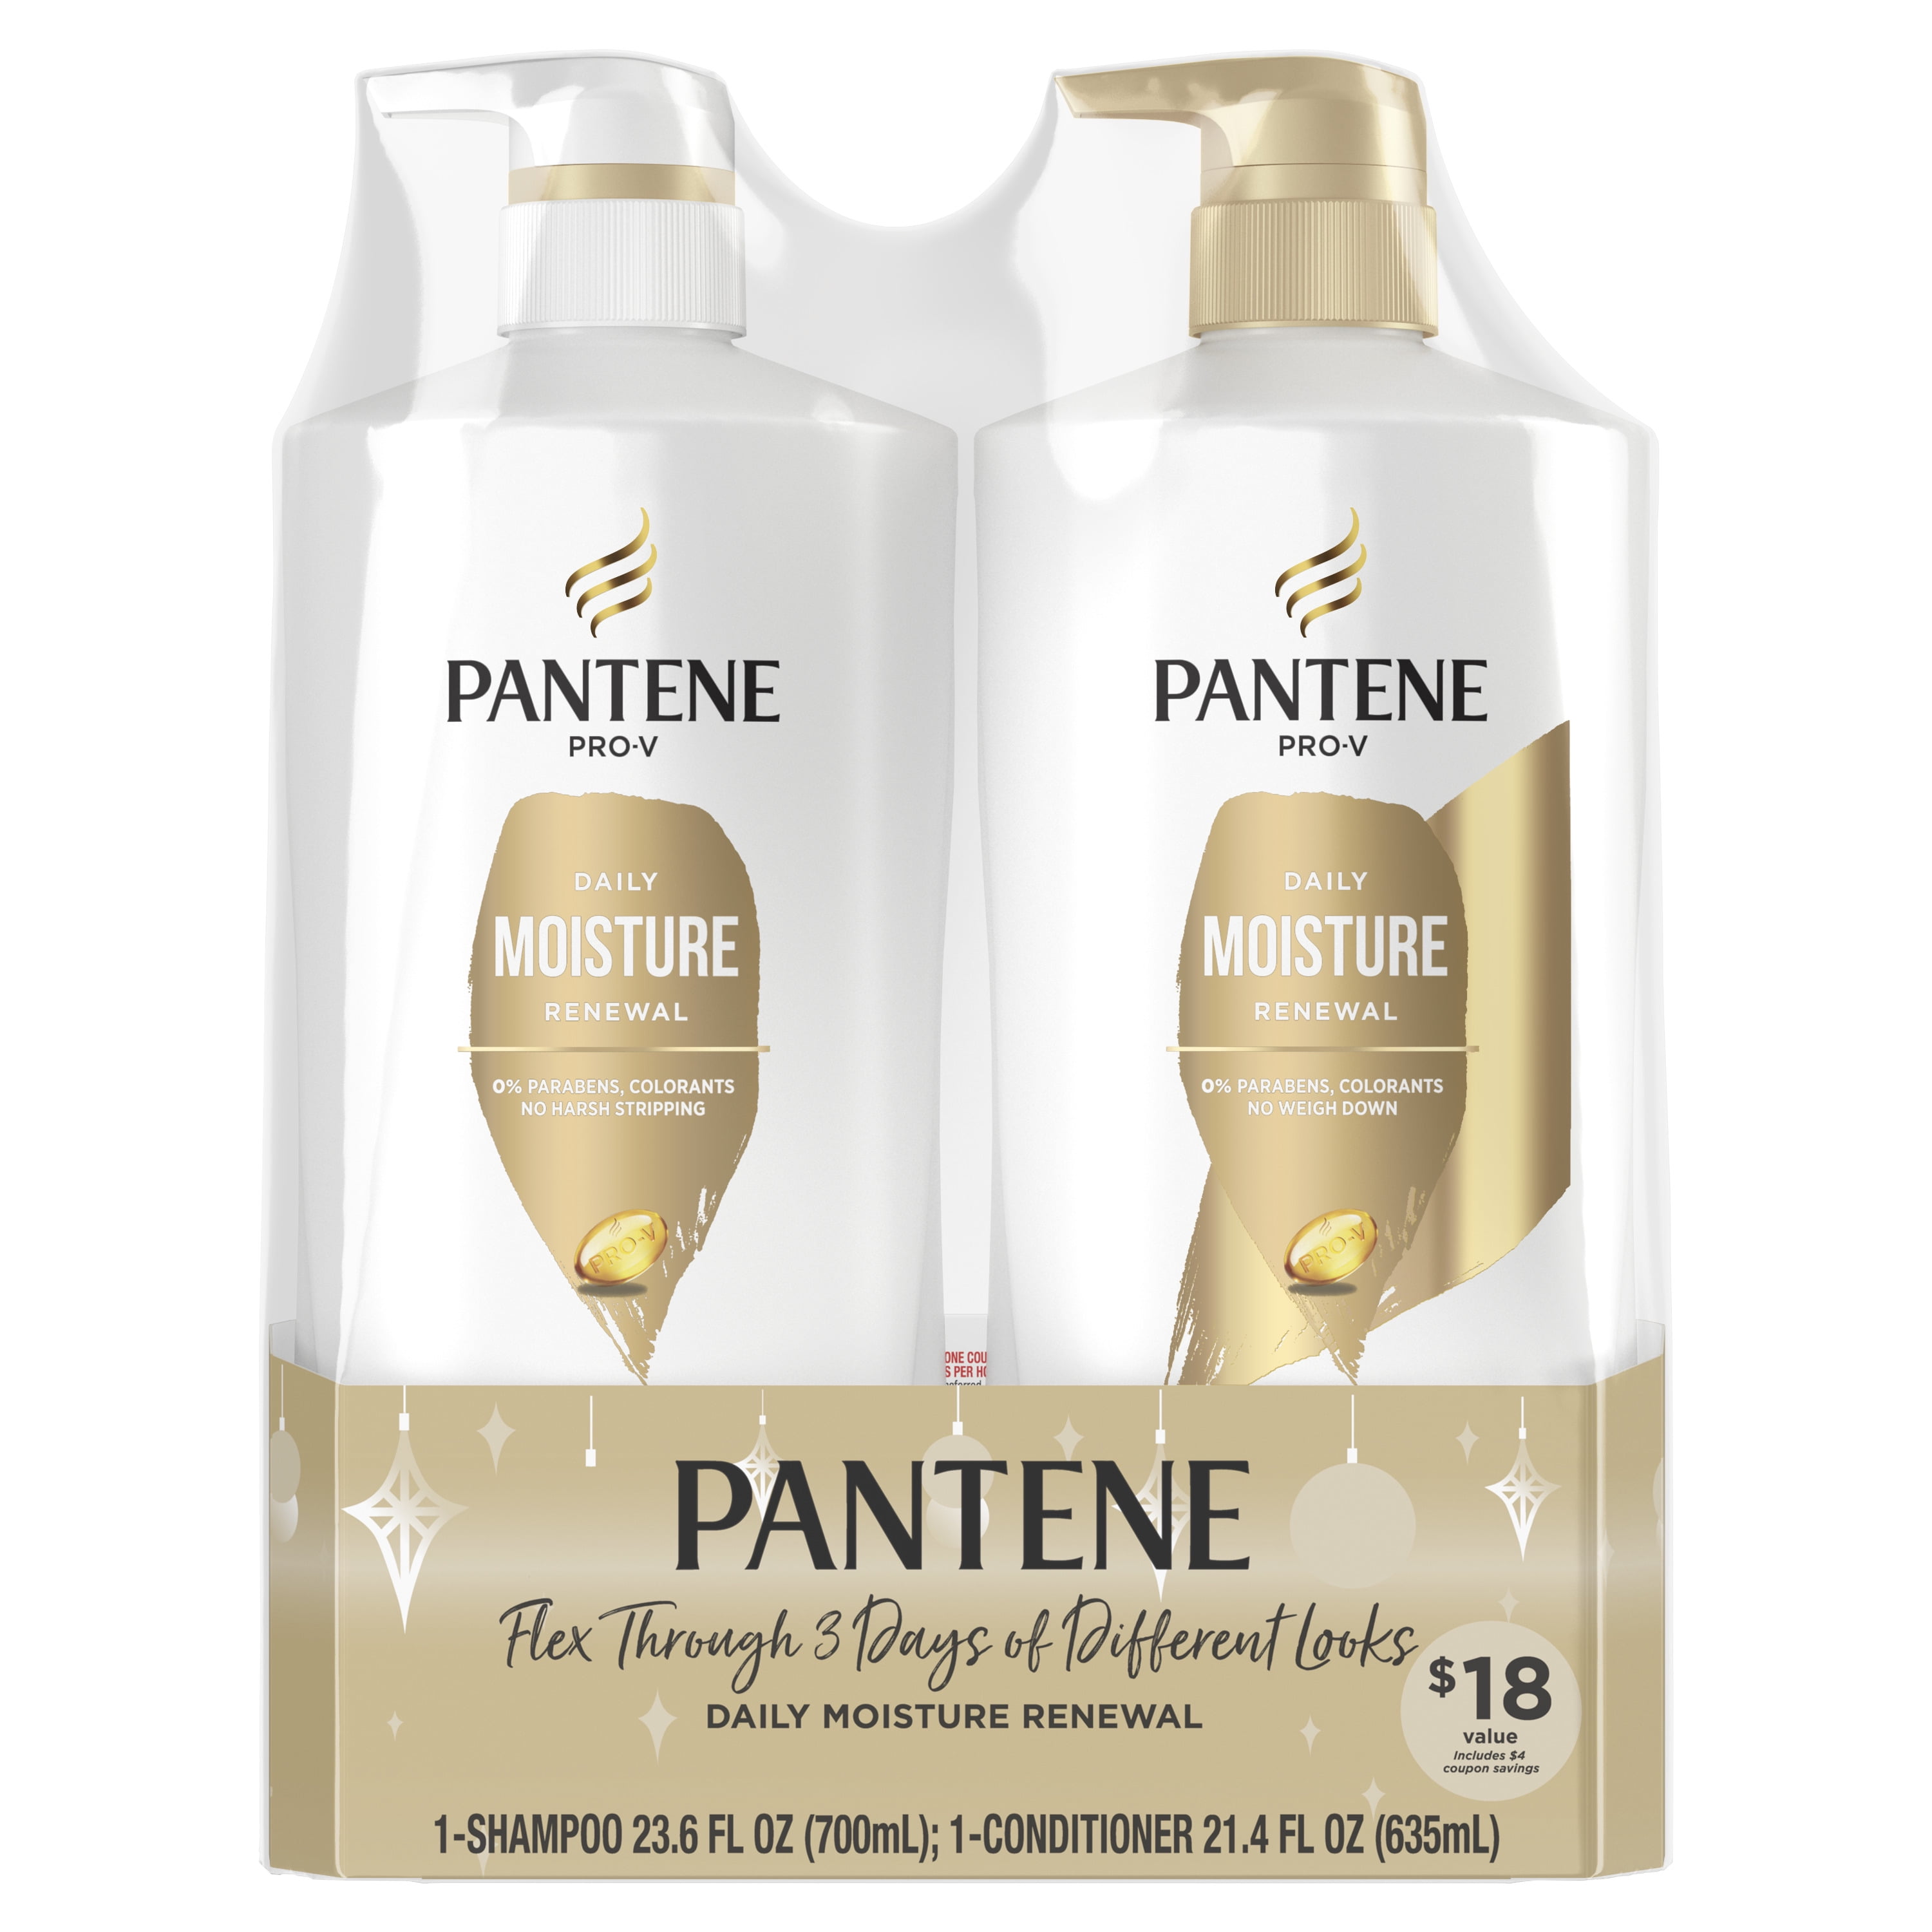 ($18 VALUE) Pantene Shampoo and Conditioner set for dry hair, Daily Moisture Renewal, 21.4-23.6oz 2ct